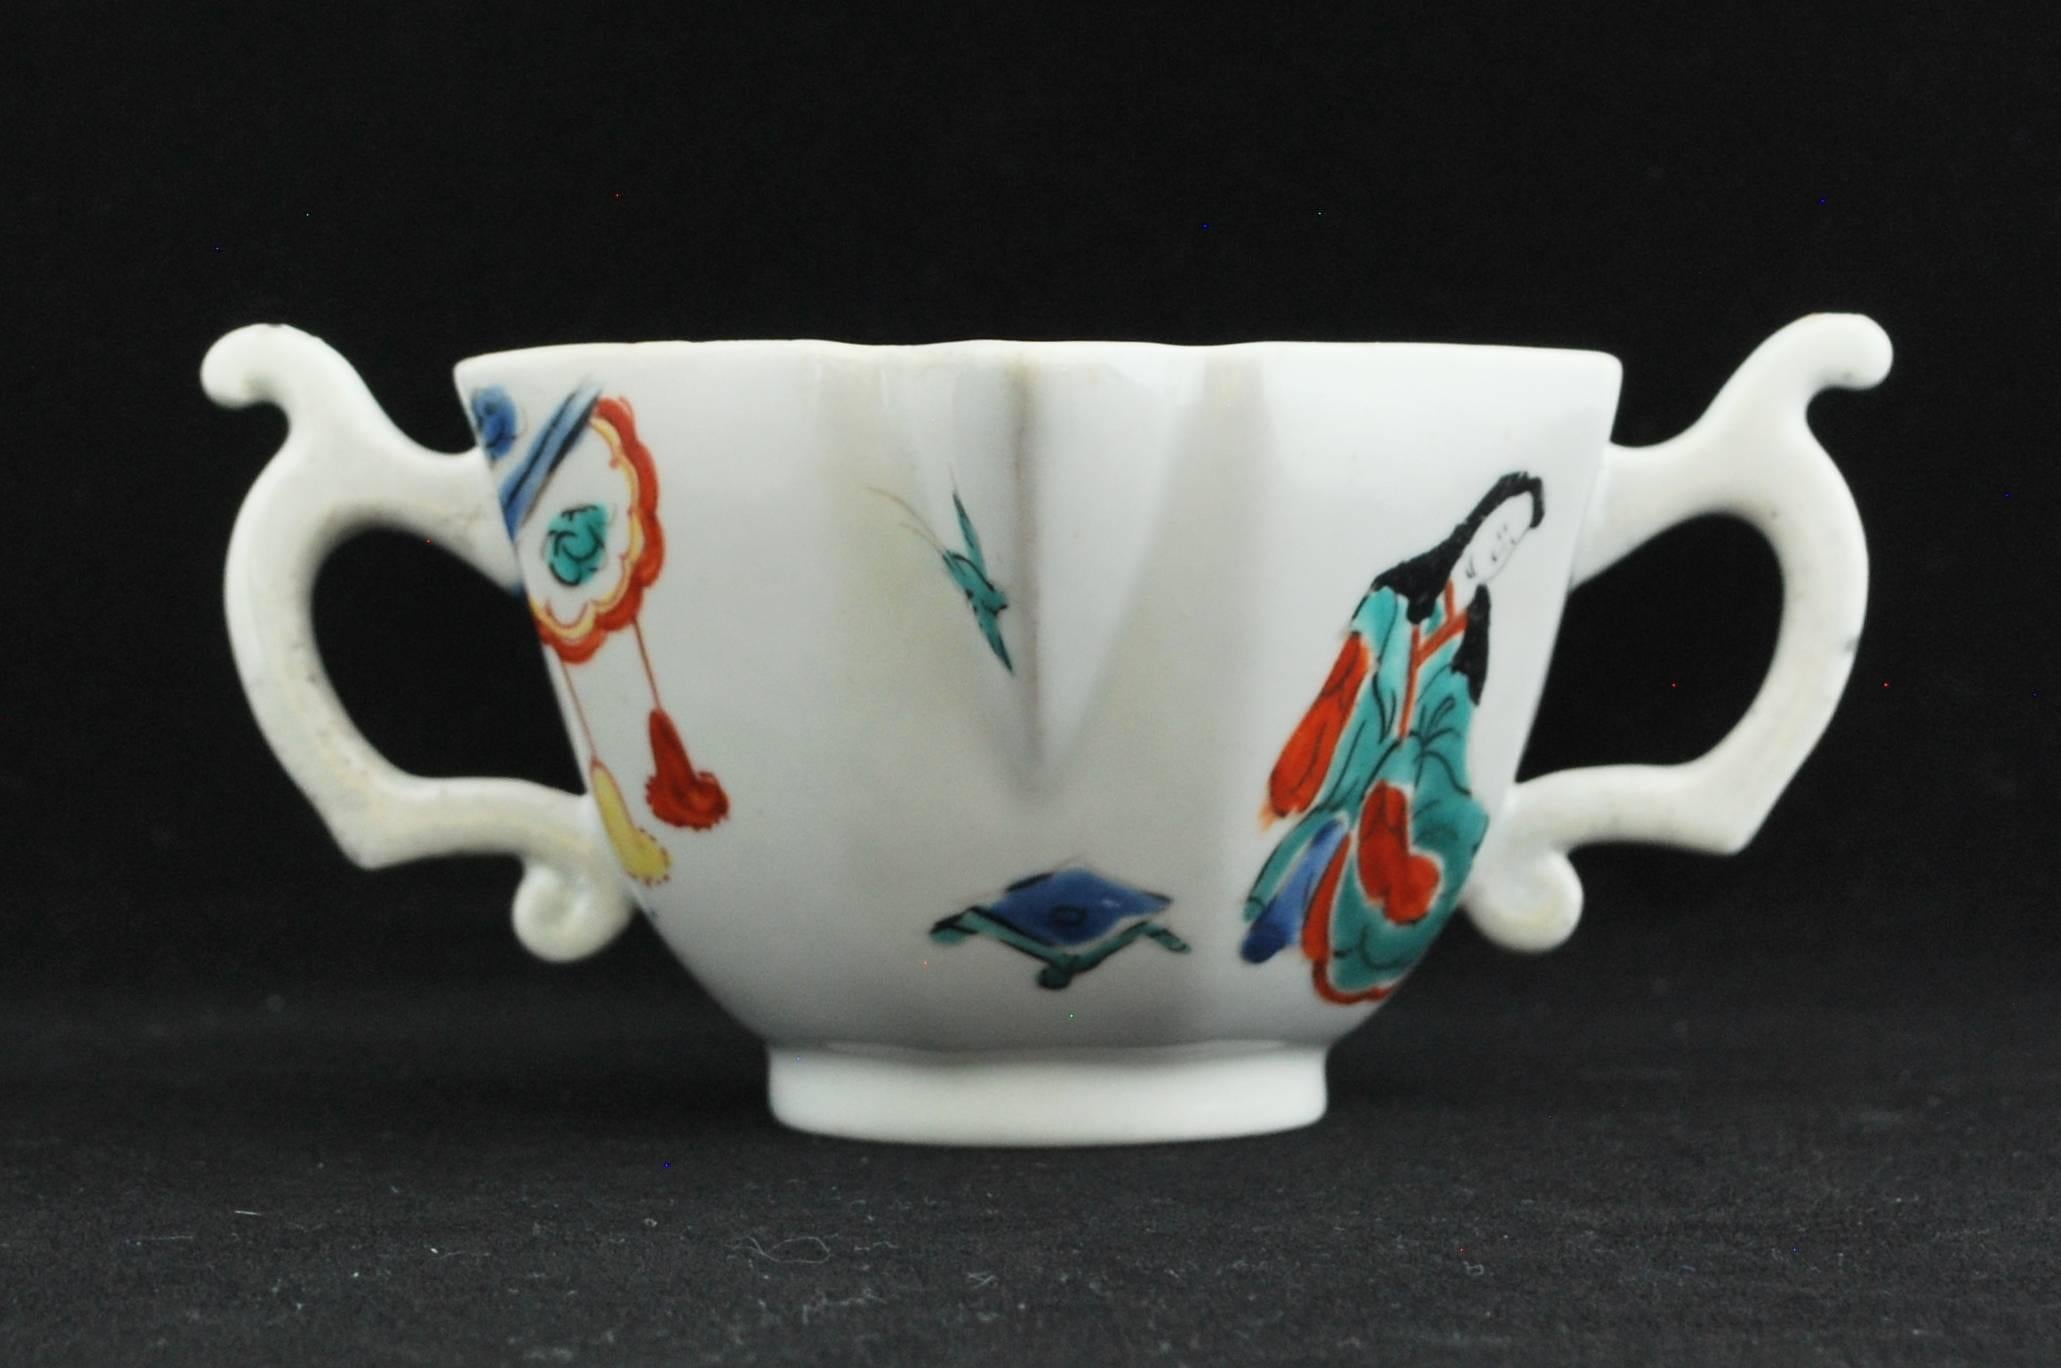 Double-handled boat in soft-paste porcelain, decorated with the Lady in a Pavillion pattern, the design and palette both after the Japanese examples of the period. Figure decoration is unusual in this period.
 
Double-handled sauce boats were a